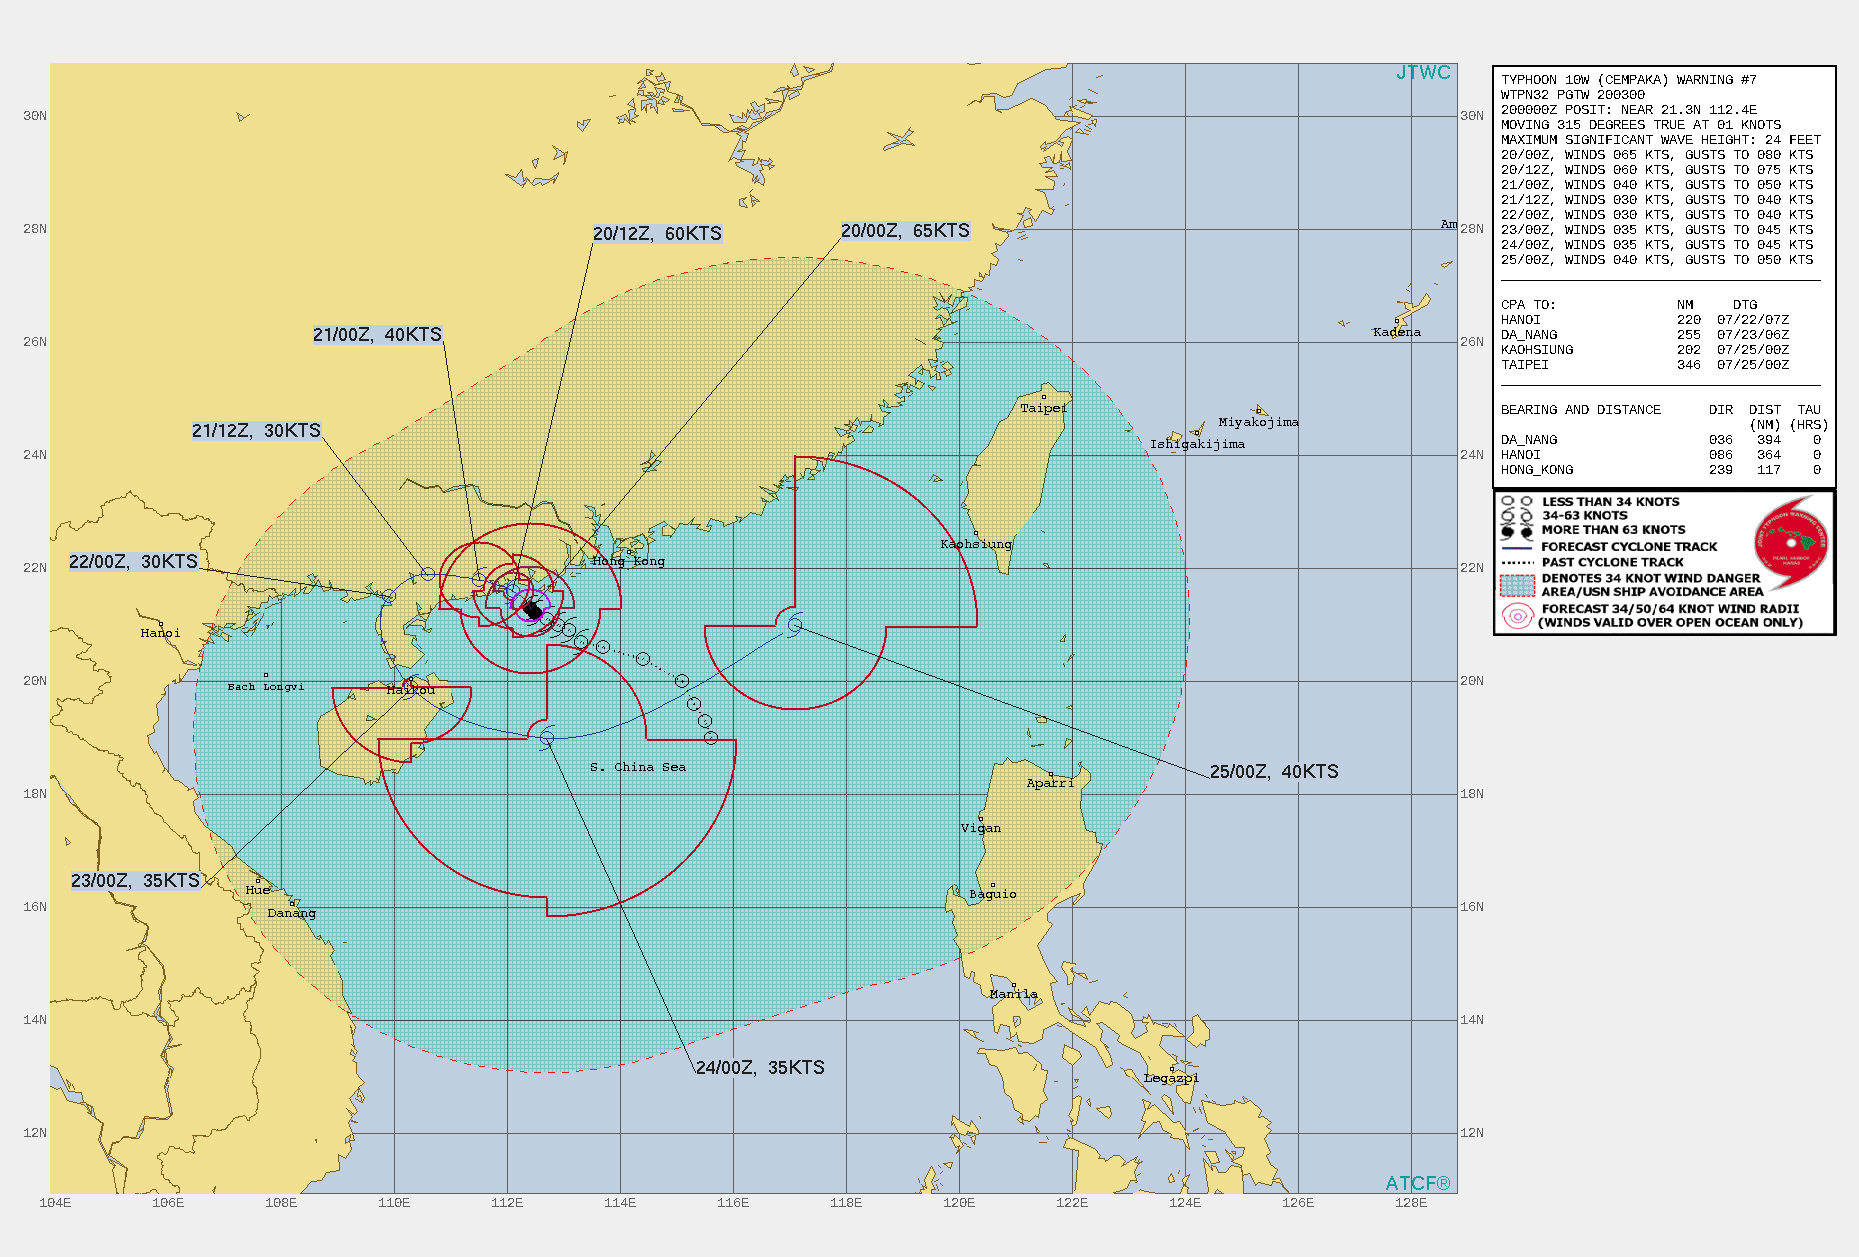 TY 10W(CEMPAKA). WARNING 7 ISSUED AT 20/03UTC.THERE ARE NO SIGNIFICANT CHANGES TO THE FORECAST FROM THE PREVIOUS WARNING.  FORECAST DISCUSSION: TY CEMPAKA WILL CONTINUE TO TRACK NORTHWESTWARD UNDER THE STR AND MAKE LANDFALL SHORTLY AFTER 12H ALONG THE SOUTHEASTERN CHINESE COAST NEAR YANGJIANG. AFTER 36H, IT WILL BEGIN TO MAKE A TIGHT LEFT U-TURN TRACING THE WEST COAST OF LEIZHOU PENINSULA INTO THE EASTERN TIP OF HAINAN BEFORE EXITING BACK INTO THE SOUTH CHINA SEA (SCS) AFTER 72H. BY 120H, TY 10W WILL BE ACCELERATING NORTHEASTWARD IN THE MIDDLE OF THE SCS BETWEEN HONG KONG AND LUZON, PHILIPPINES. LAND INTERACTION WITH THE RUGGED CHINESE INTERIOR WILL RAPIDLY DECAY THE CYCLONE DOWN TO 30KNOTS. HOWEVER, AFTER 48H, INCREASED MOISTURE FROM THE GULF OF TONKIN WILL REVIVE IT TO 35KNOTS, AND BY 120H WILL BE UP TO 40KNOTS.